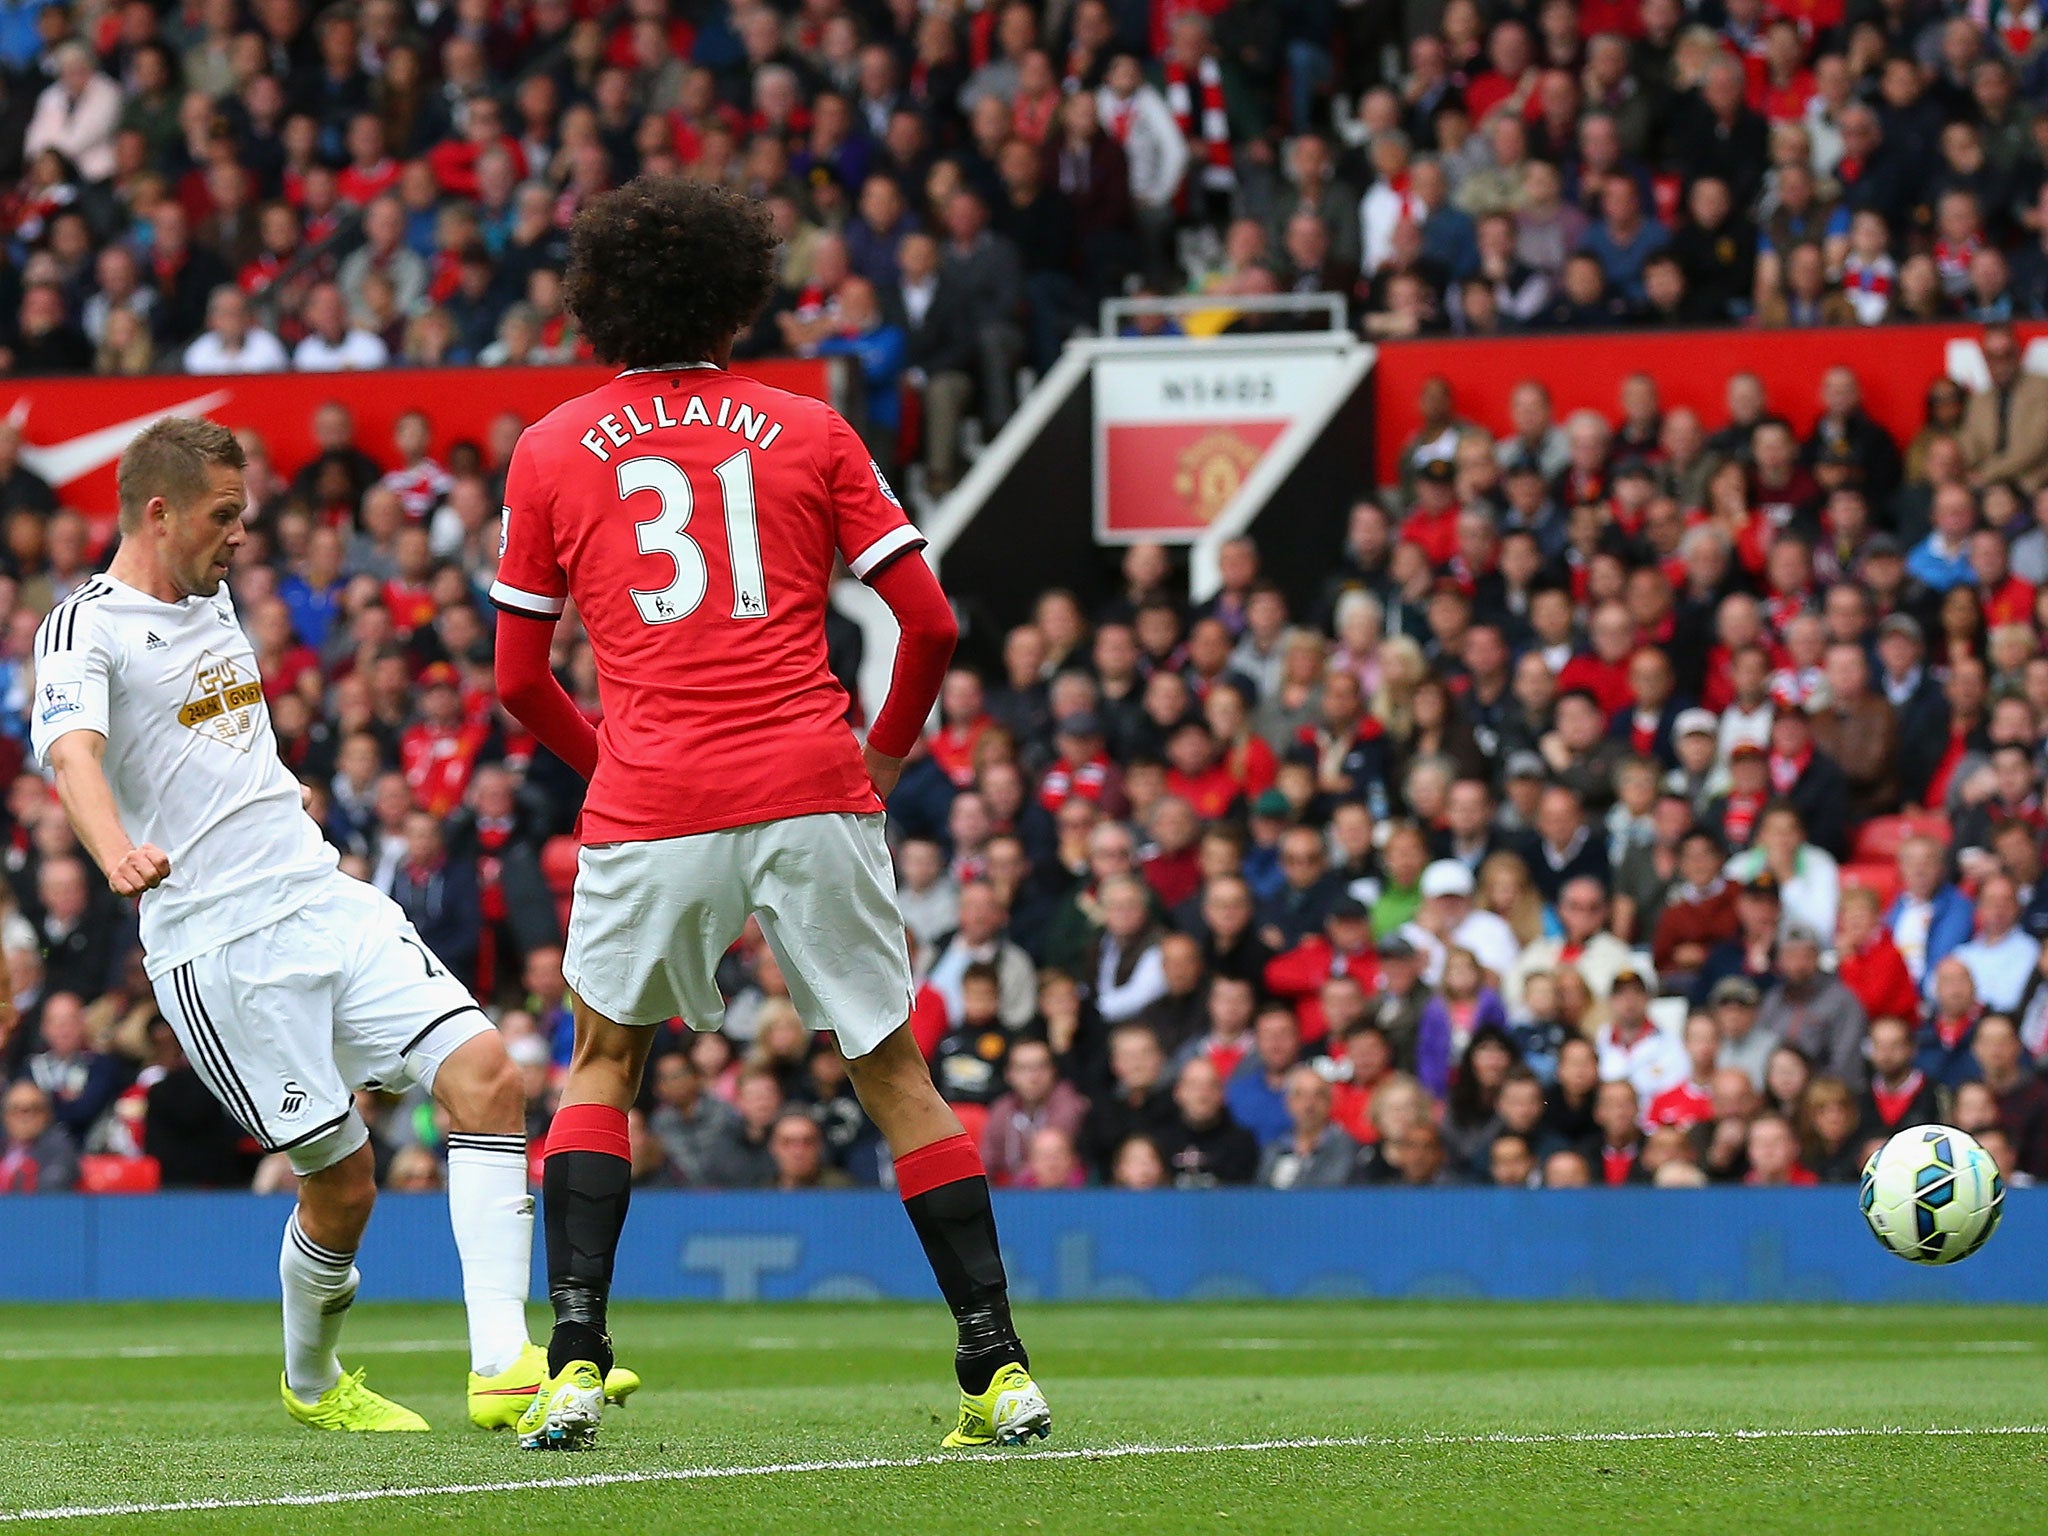 Gylfi Sigurdsson fires home the winner to secure Swansea a 2-1 win over Manchester United